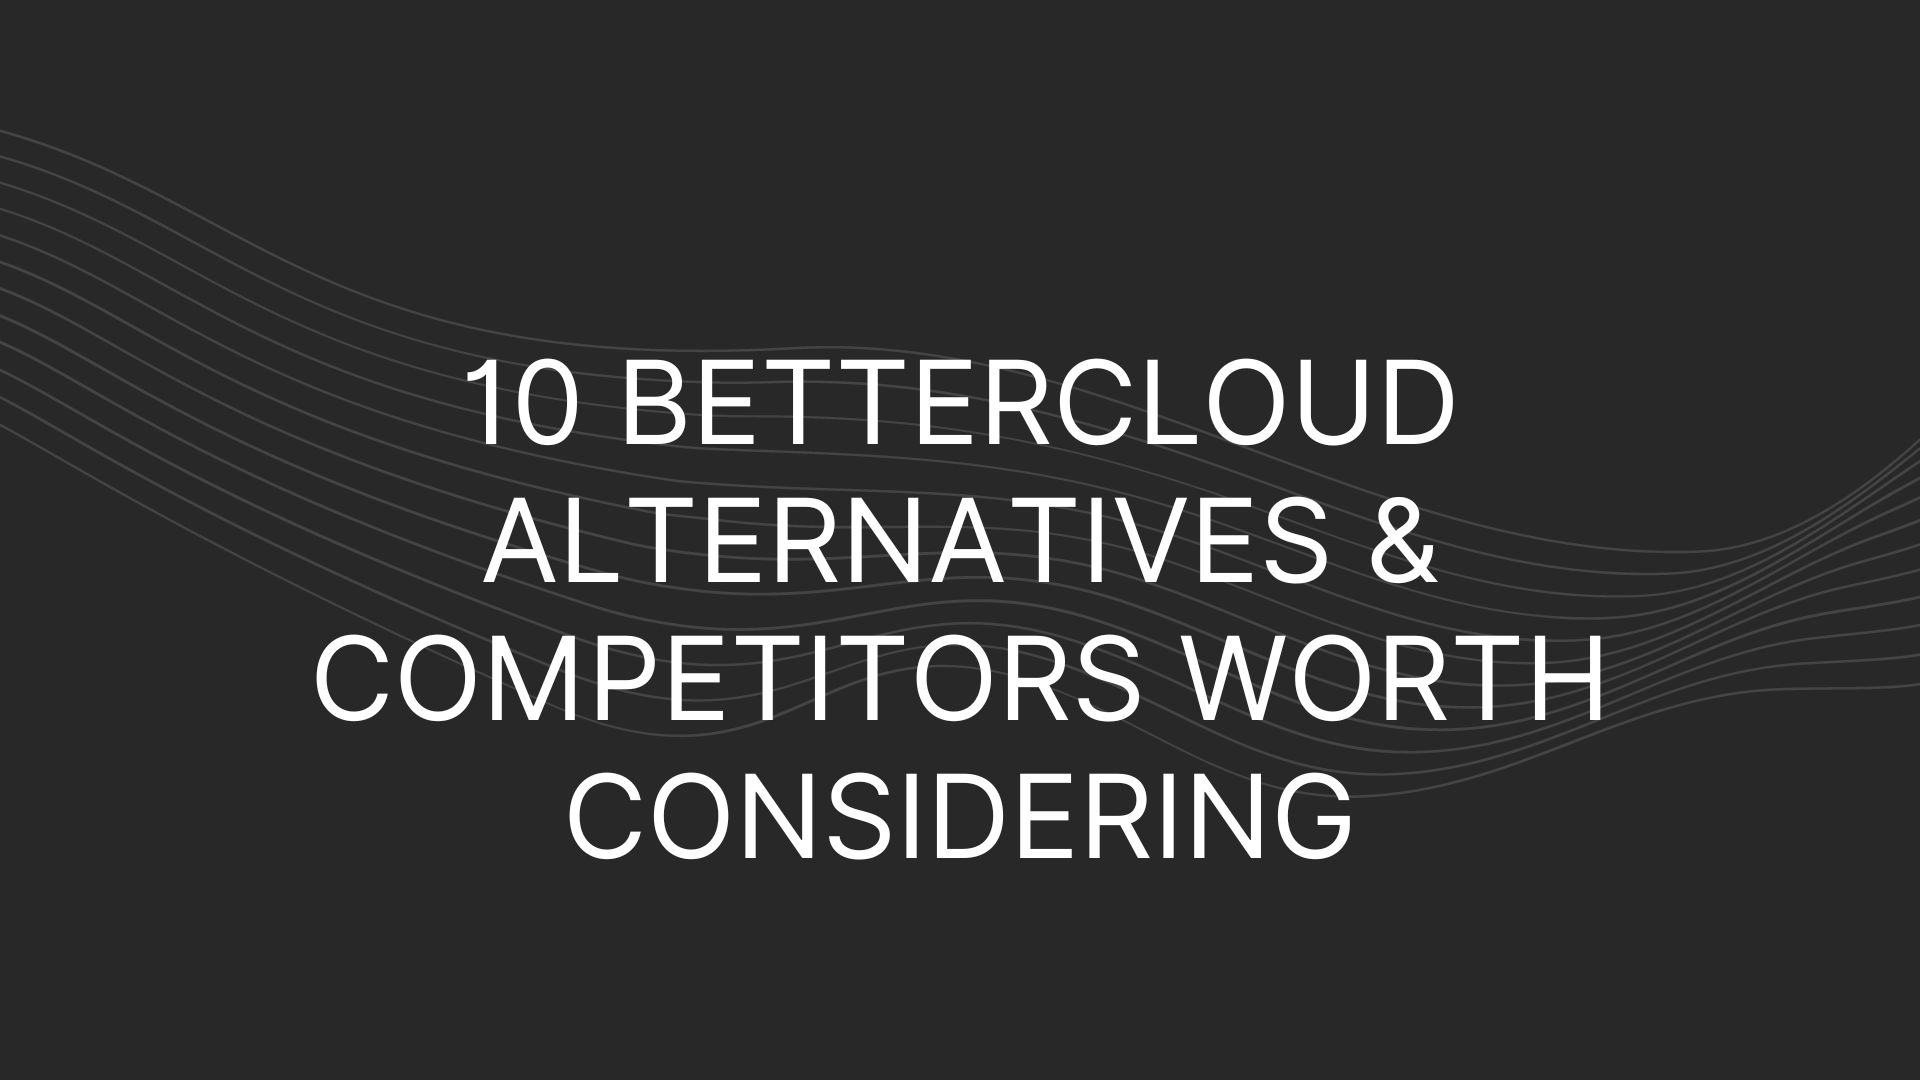 BetterCloud Alternatives and Competitors